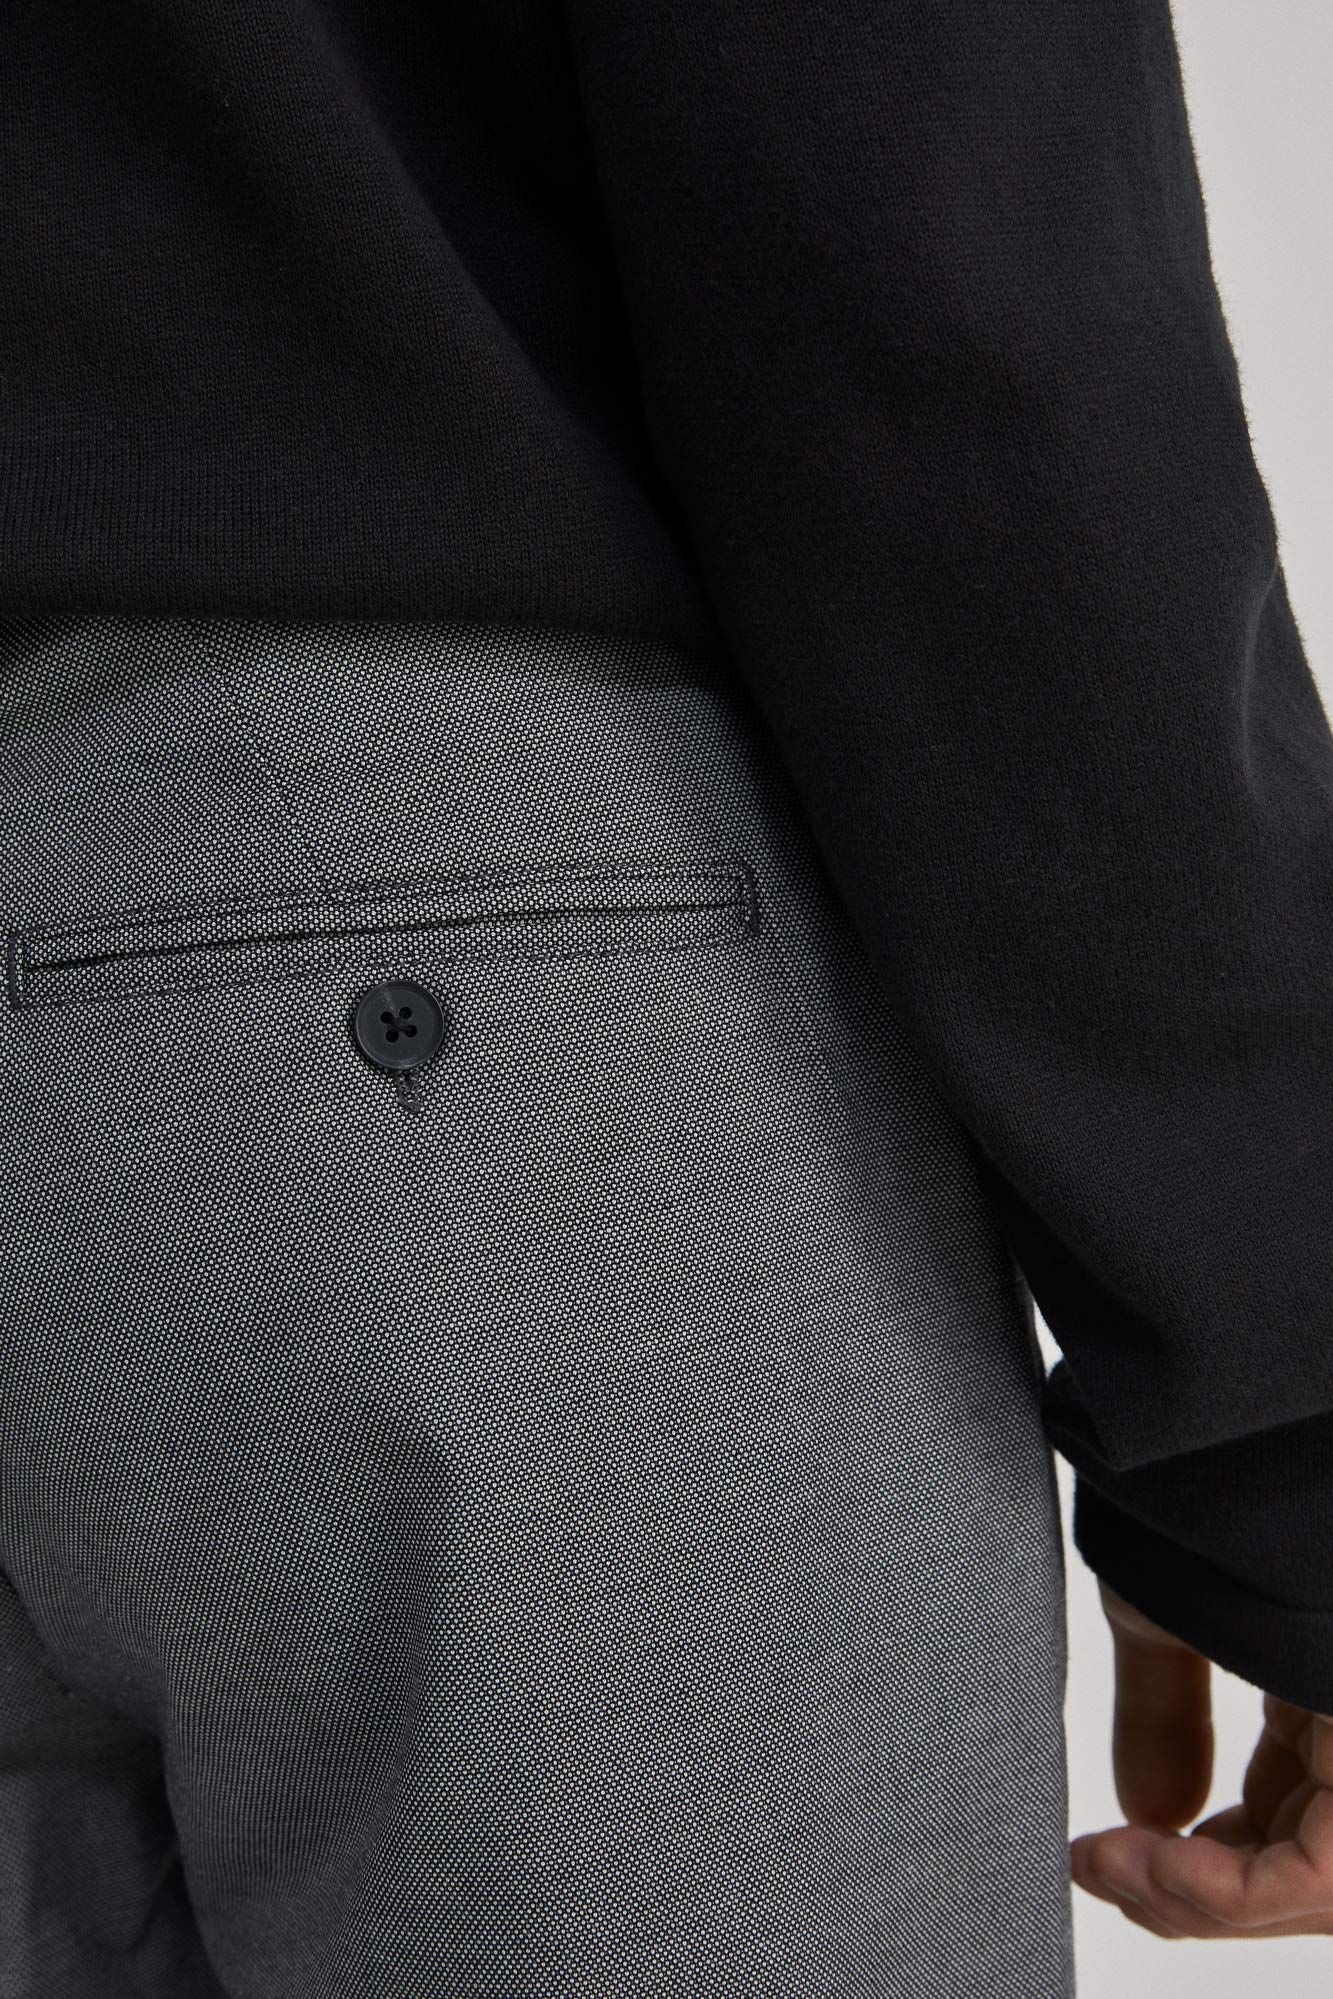 Textured two-tone formal chinos